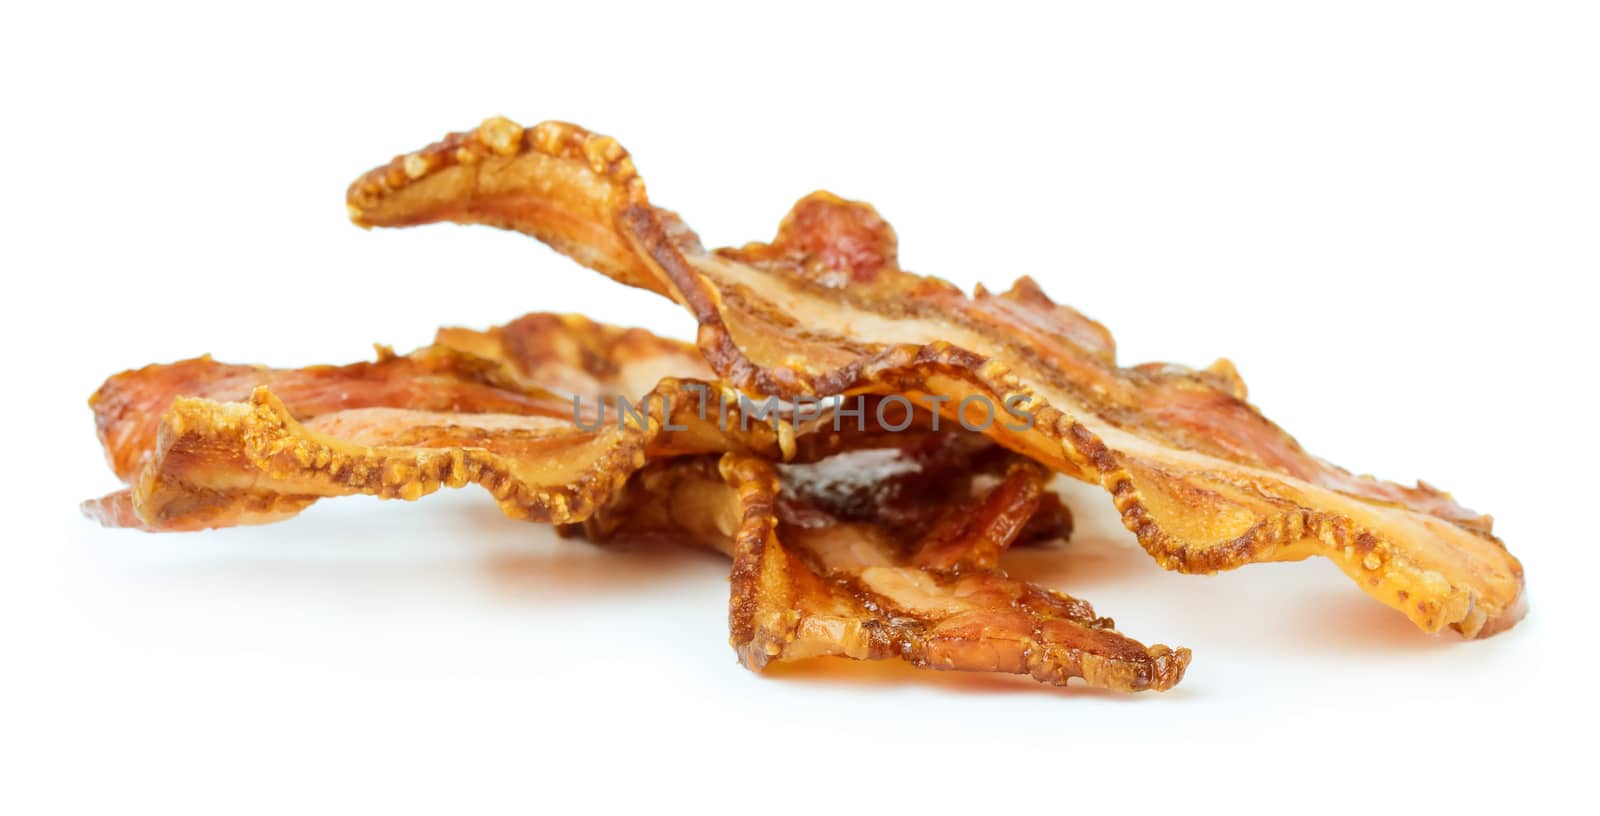 Three cooked bacon slices isolated on white background